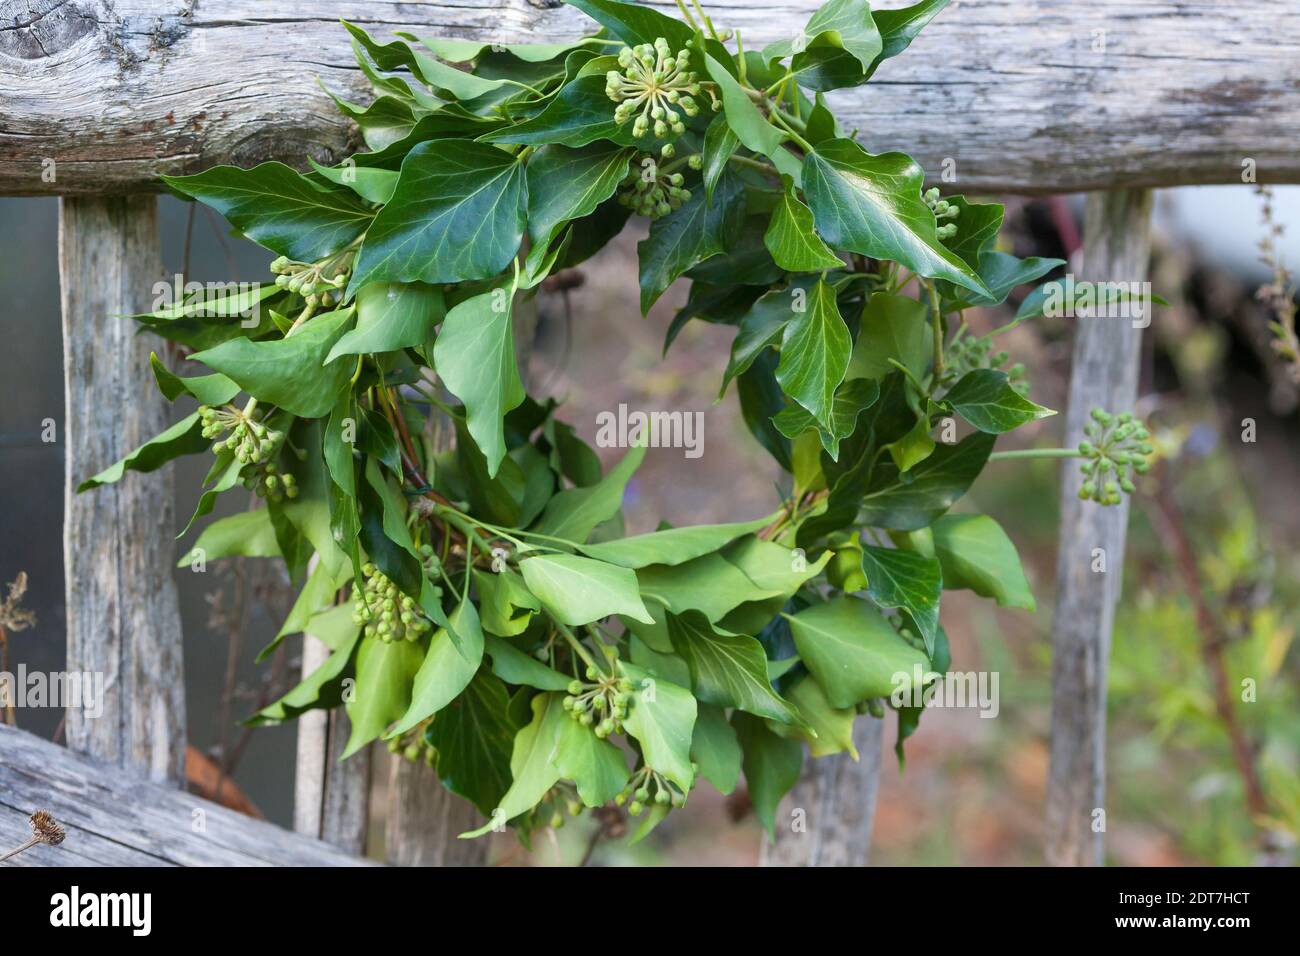 English ivy, common ivy (Hedera helix), selfmade ivy wreath, Germany Stock Photo